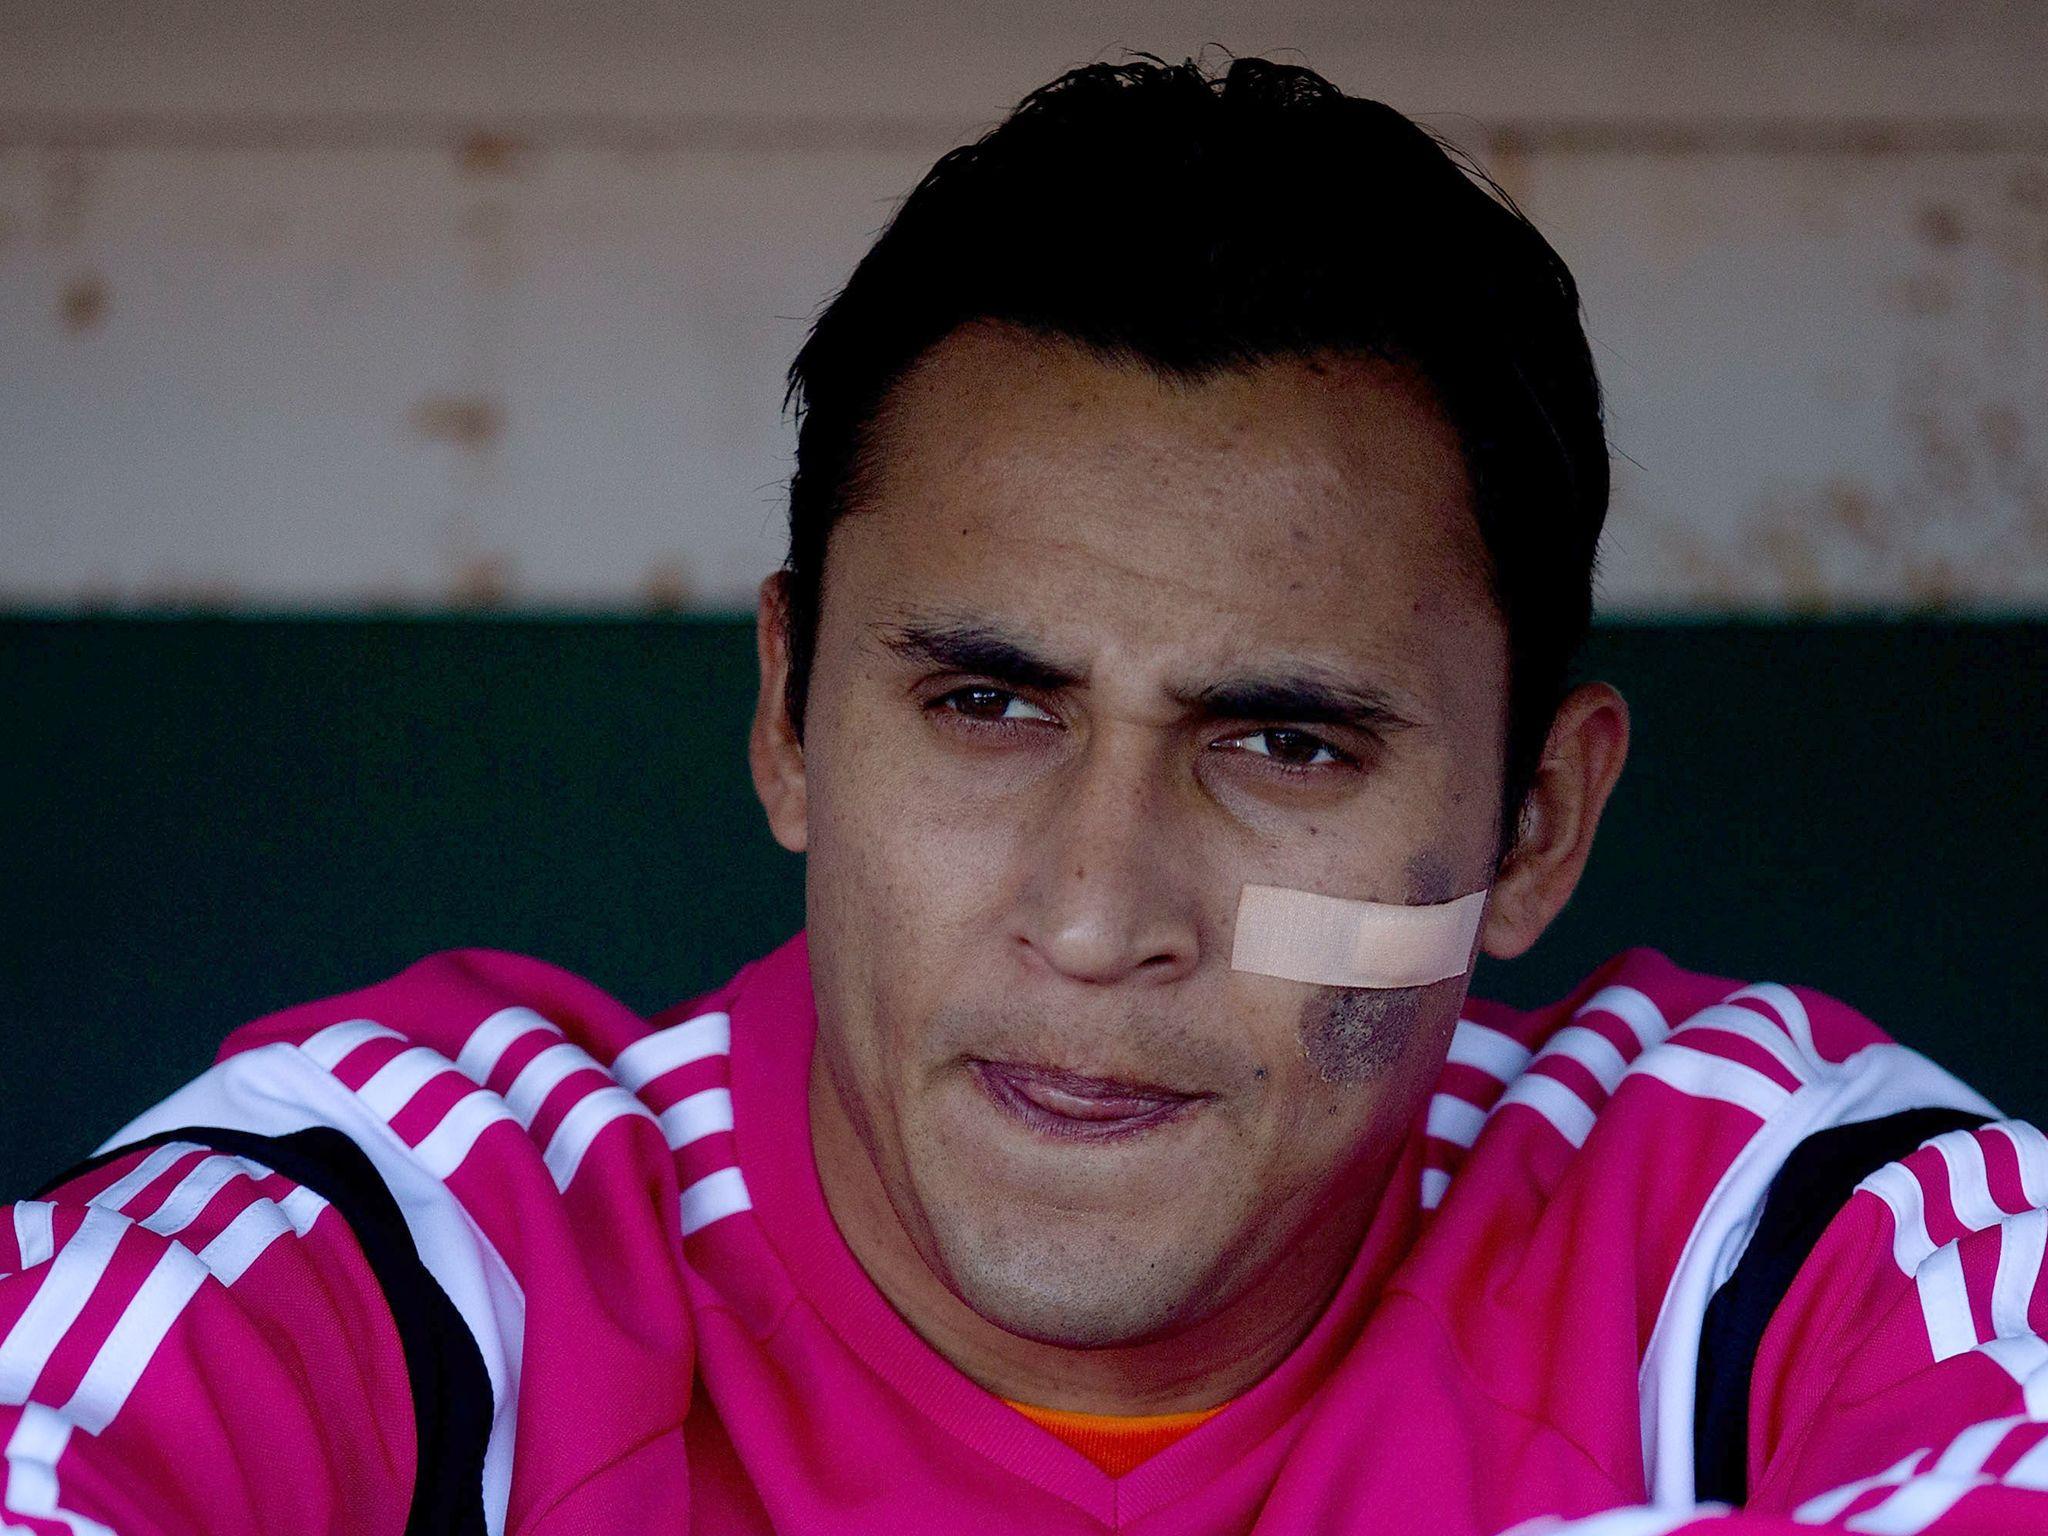 Arsenal and Liverpool 'transfer target' Keylor Navas will not